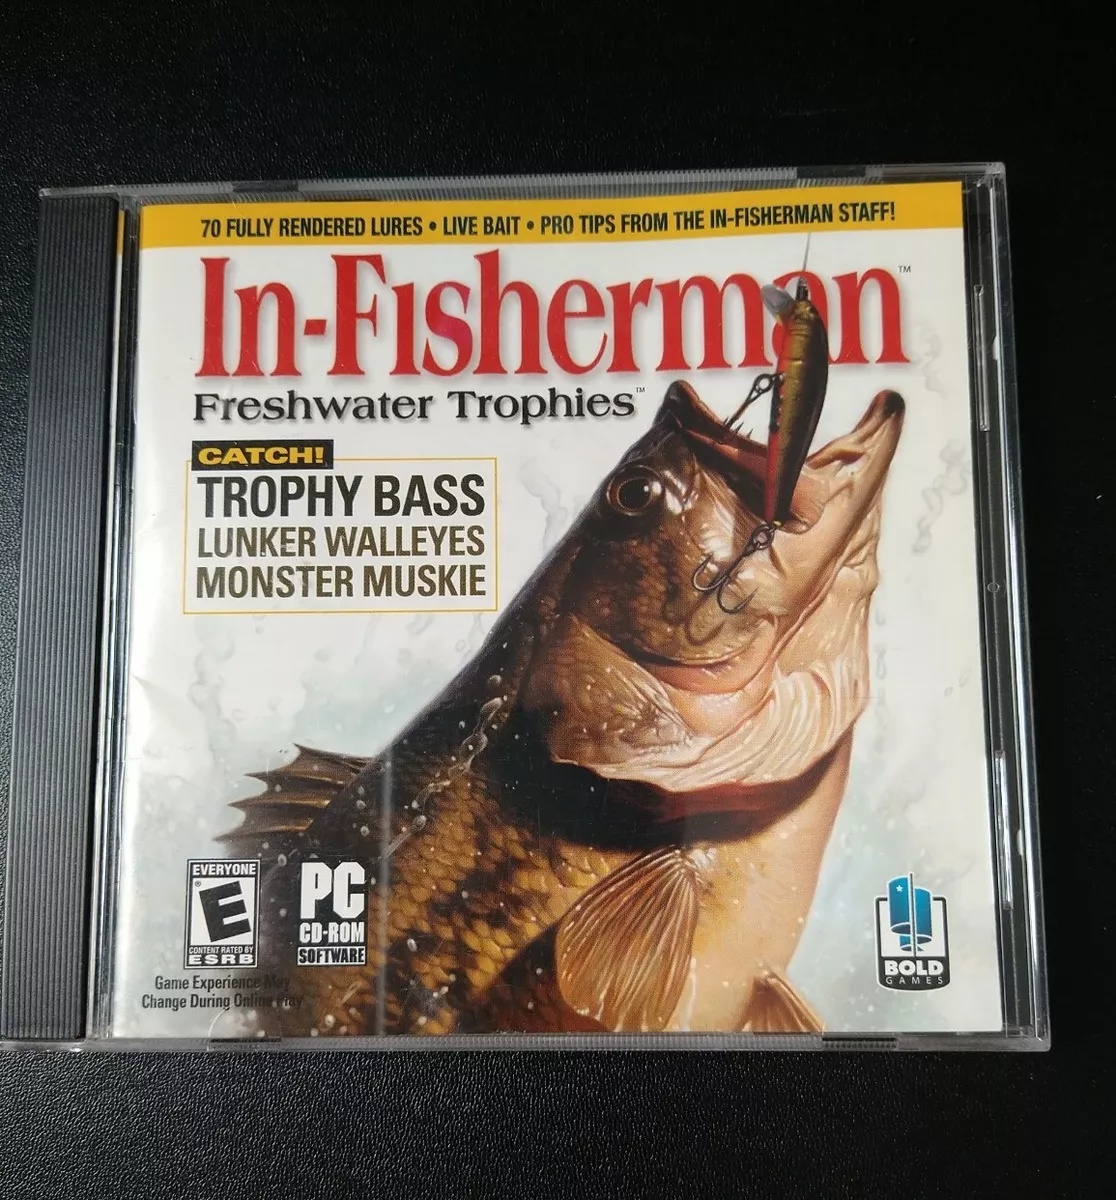 In-Fisherman: Freshwater Trophies PC Fishing Game CD-ROM 2004 Windows  Software 828068211035